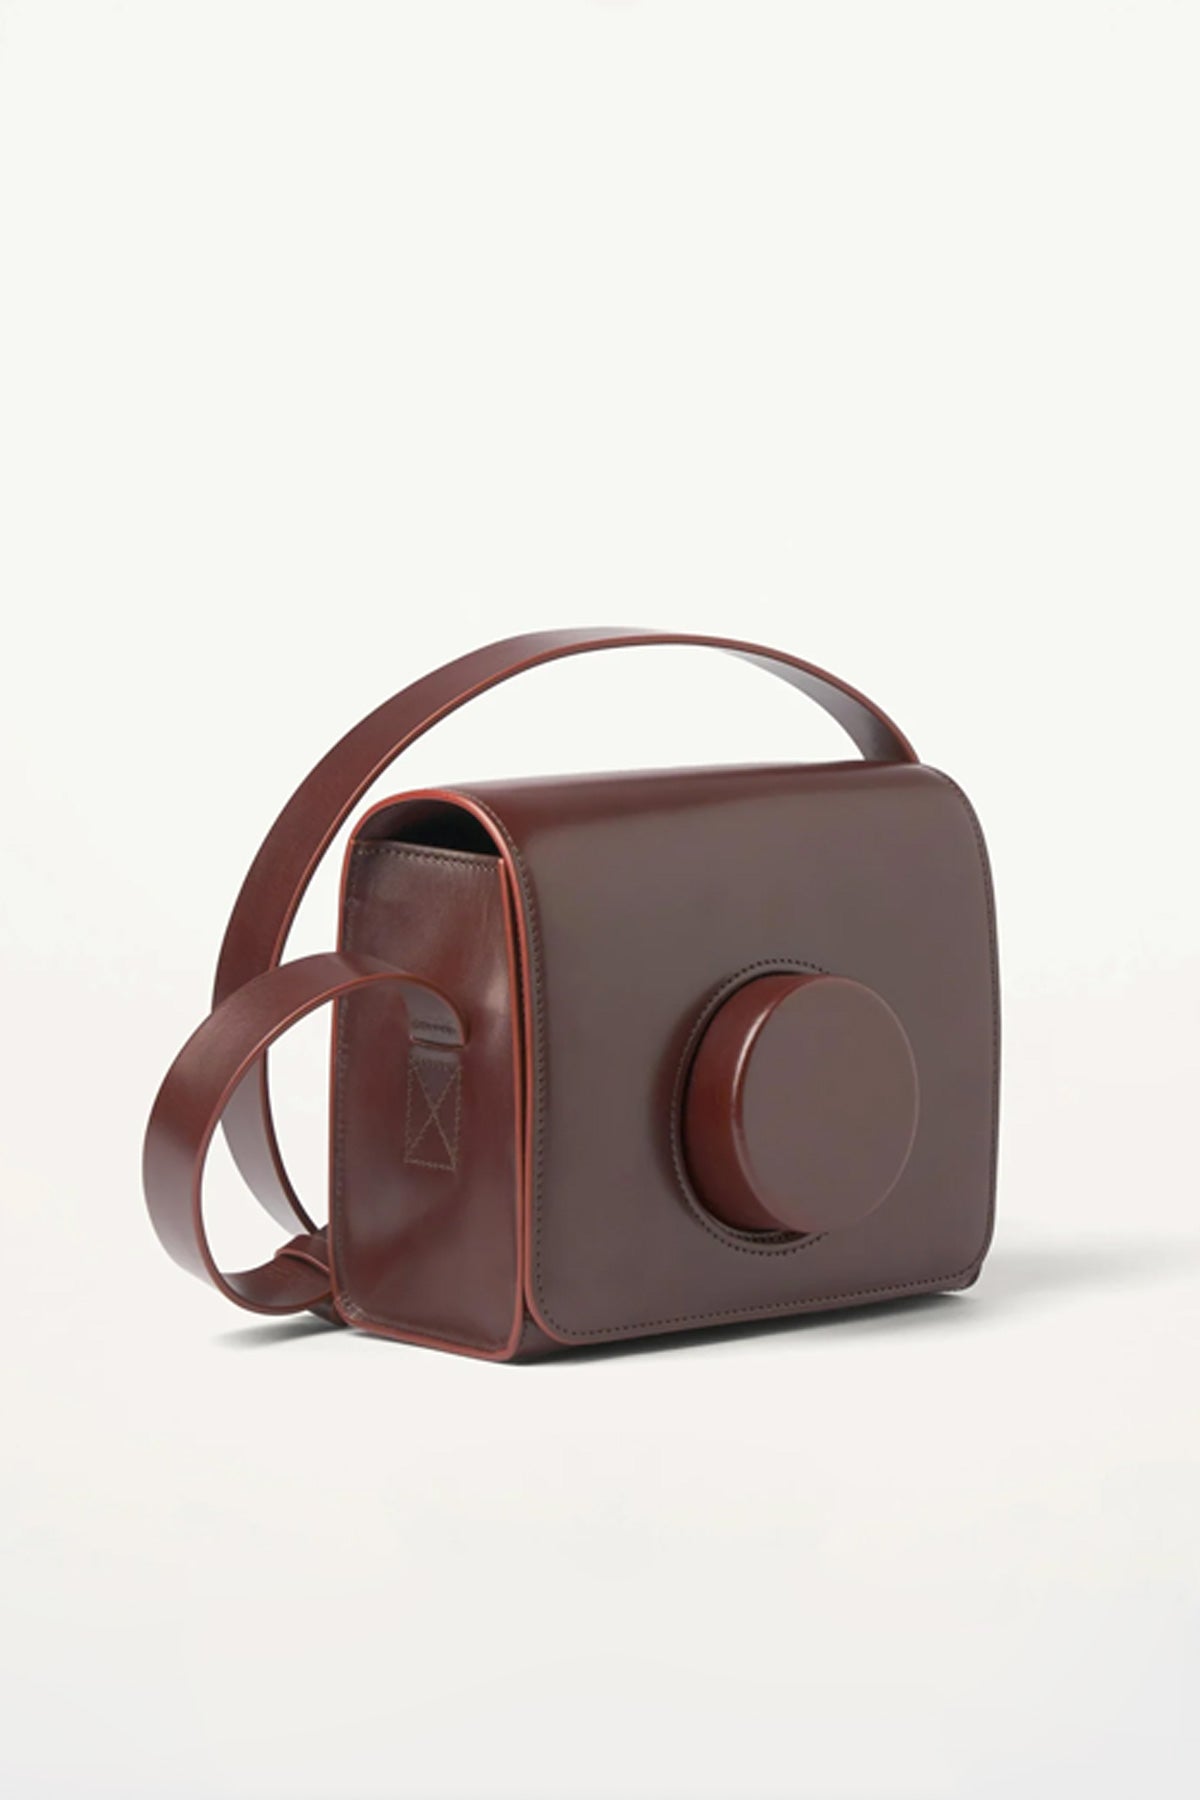 Lemaire Camera Bag, Roasted Pecan